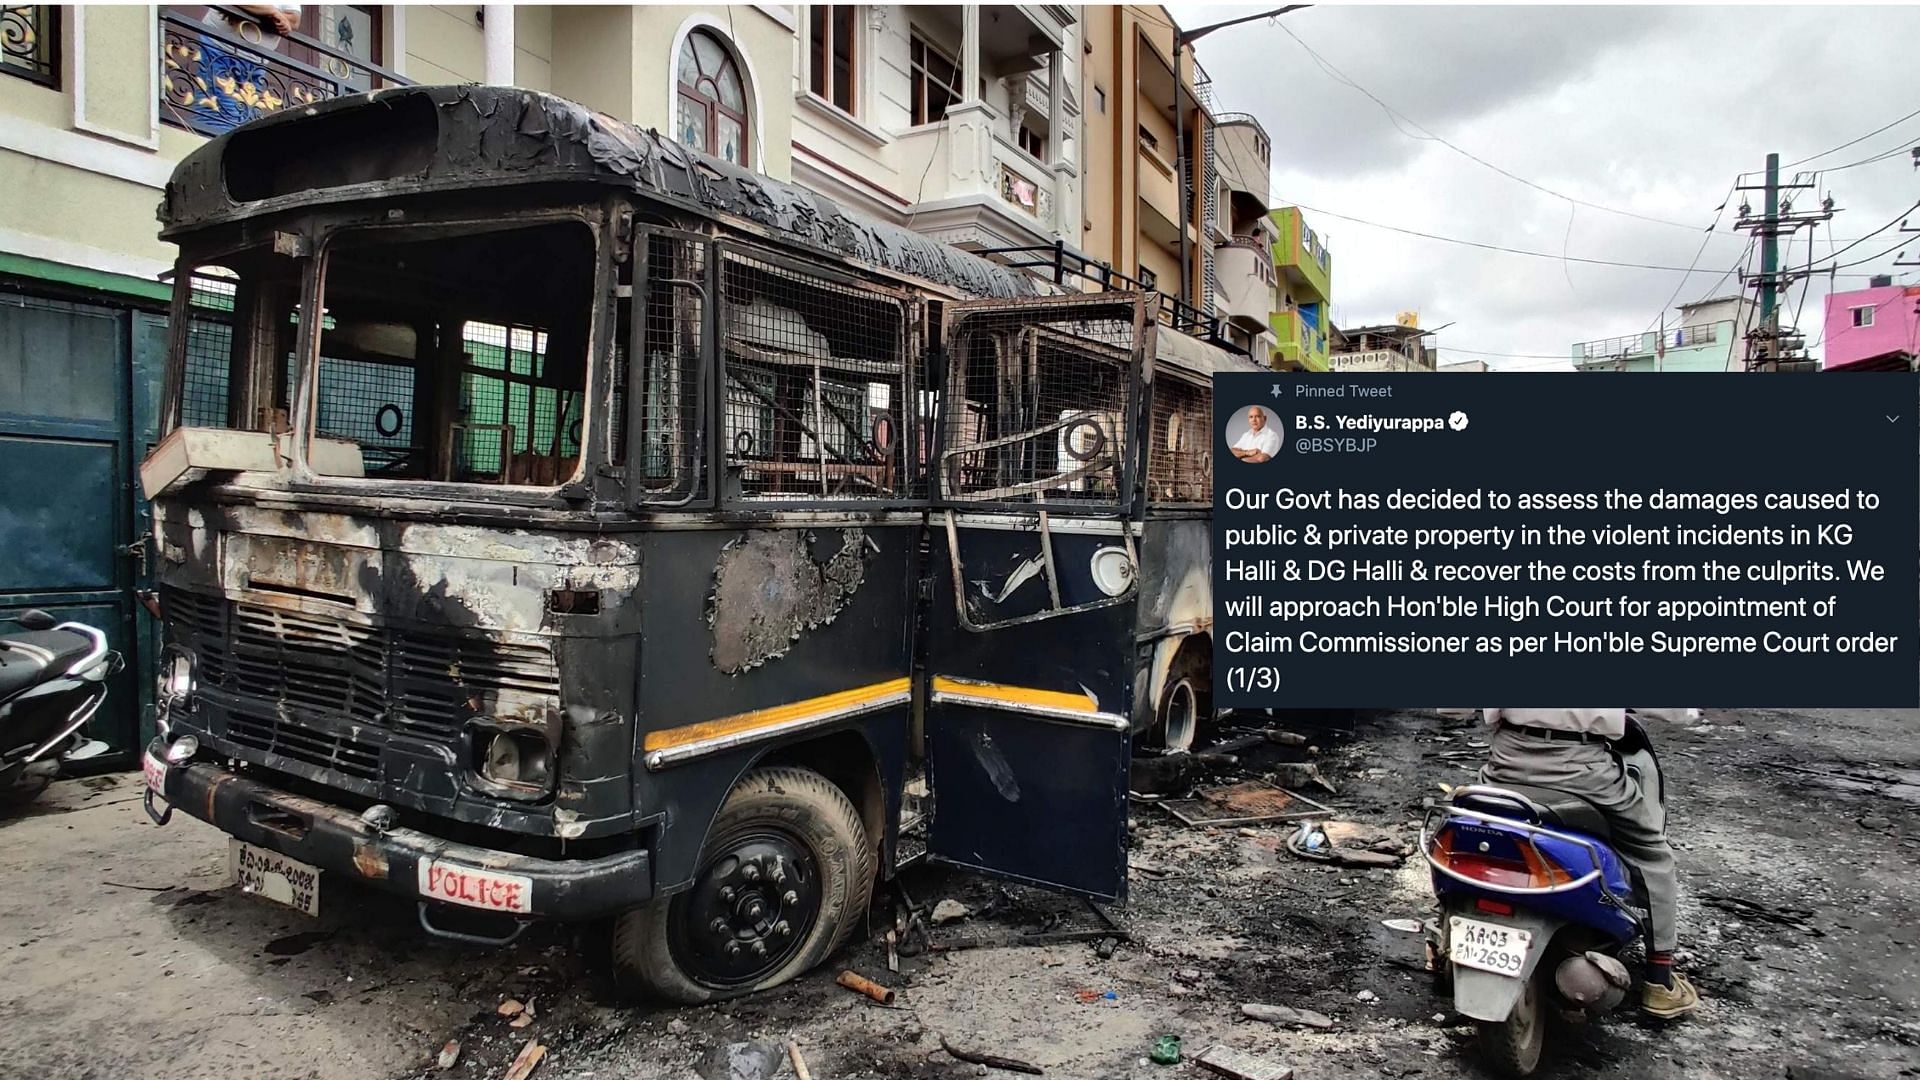 “Stringent action has been initiated against the culprits, including invoking of the UAPA,” CM Yediyurappa tweeted.